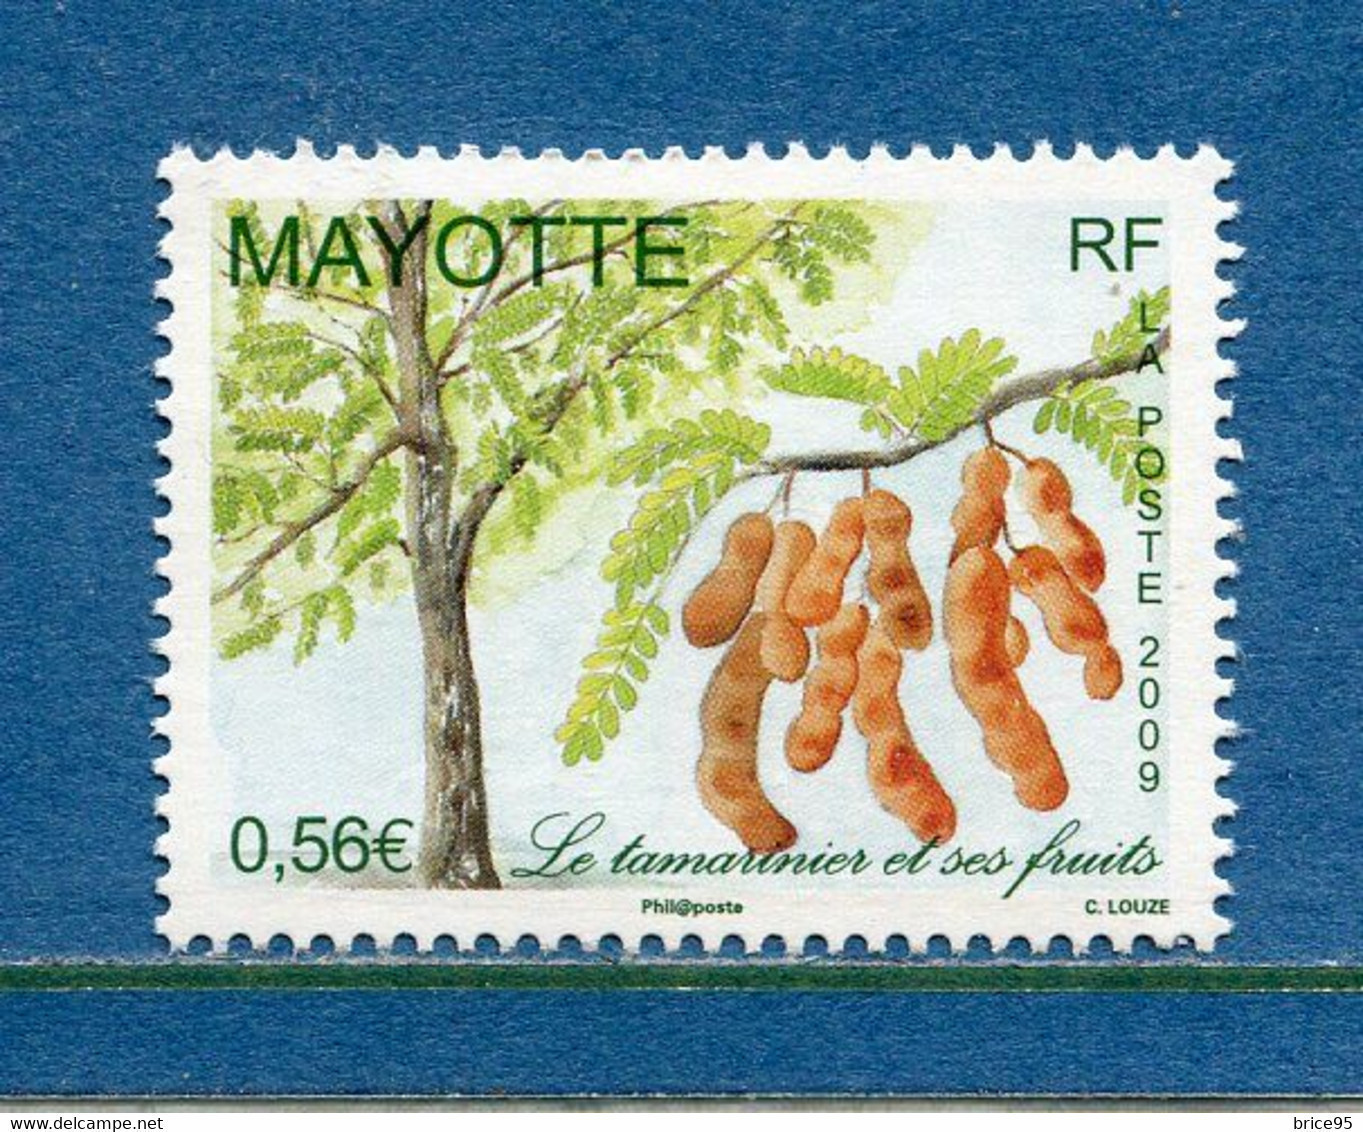 Mayotte - YT N° 223 ** - Neuf Sans Charnière - 2009 - Unused Stamps